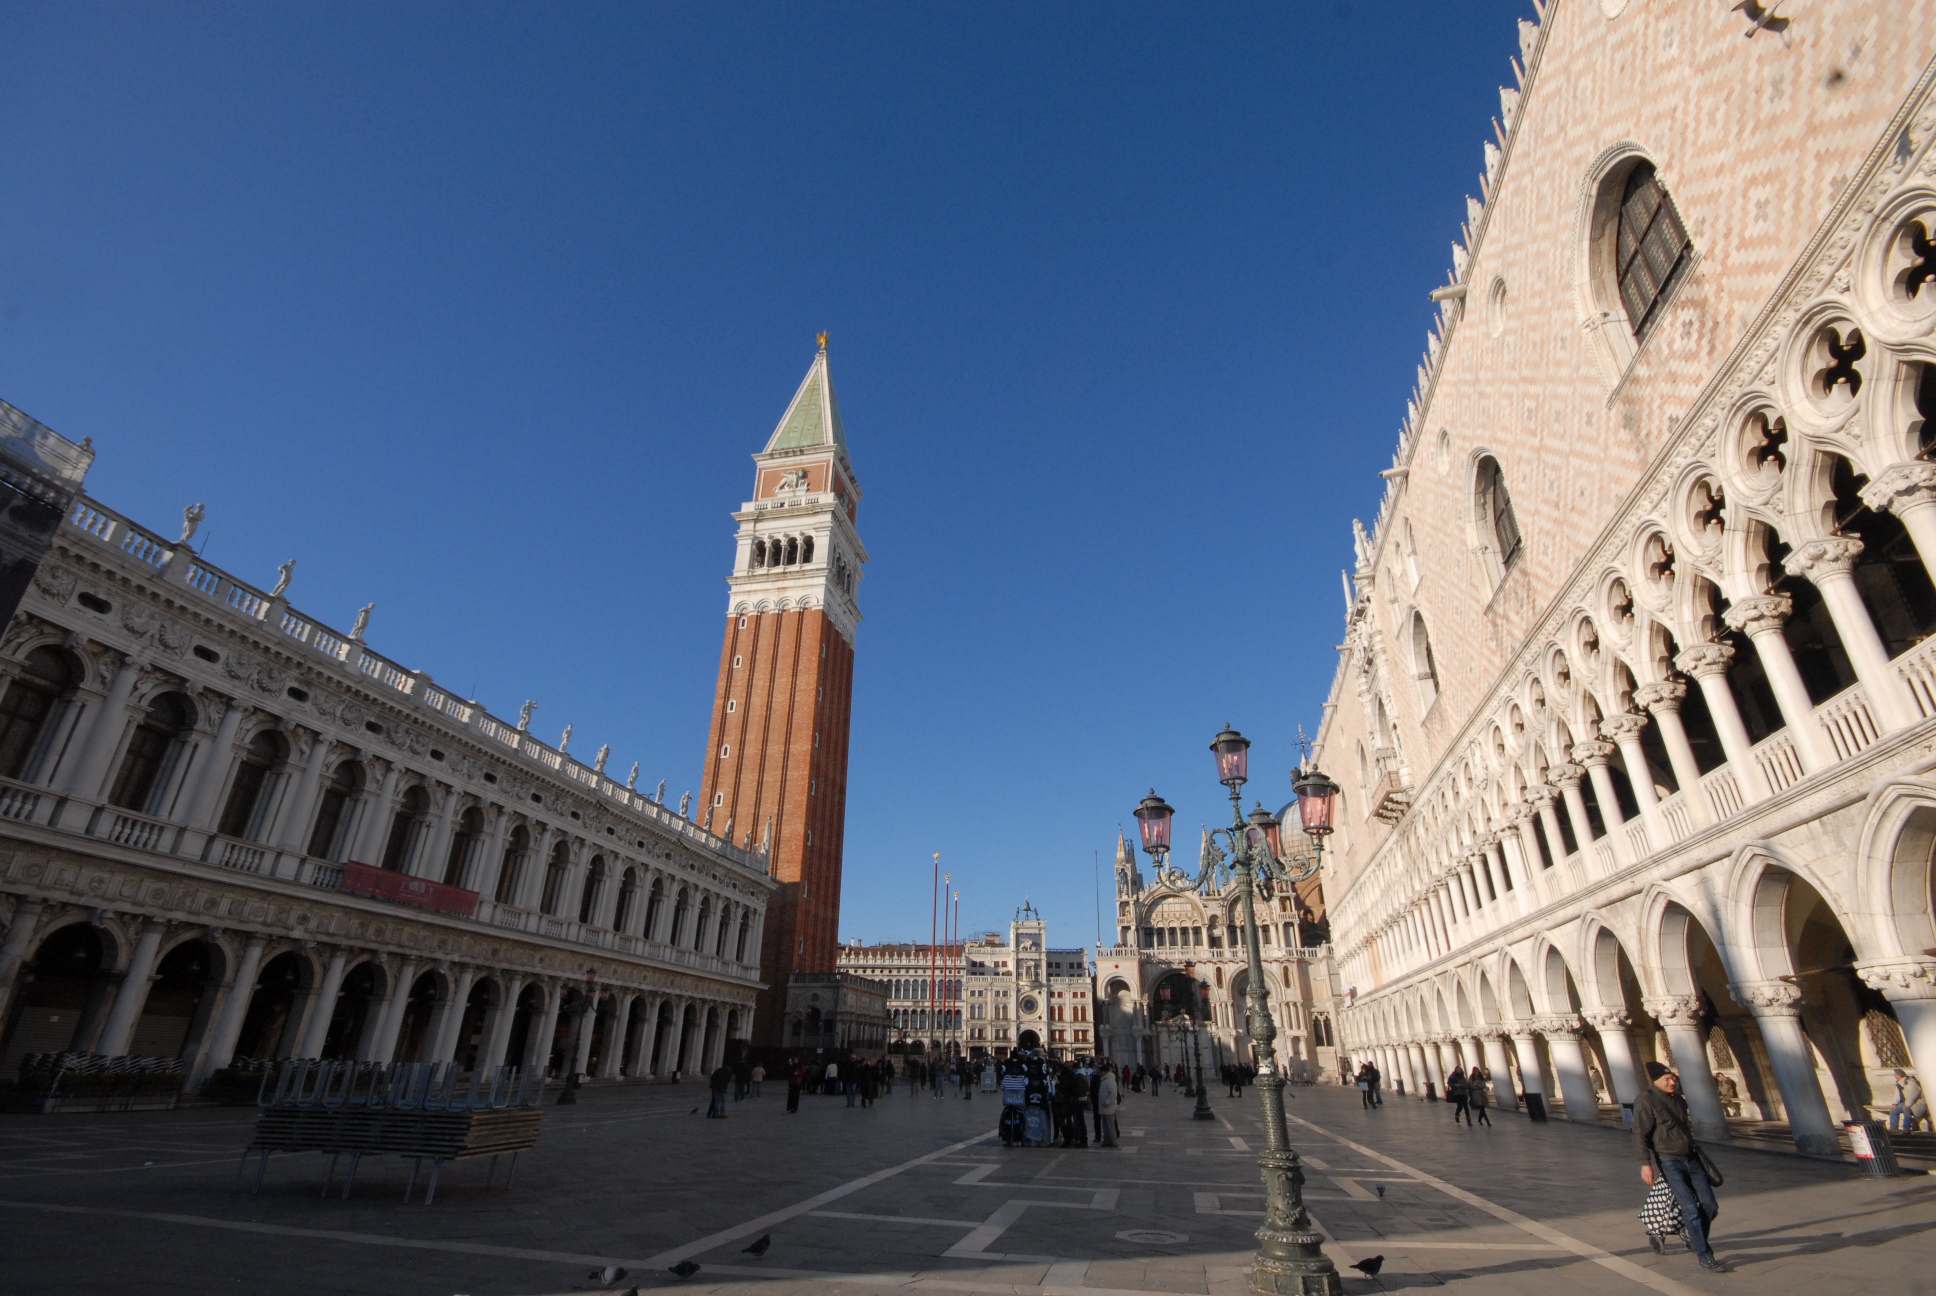 The piazzetta in San Marco